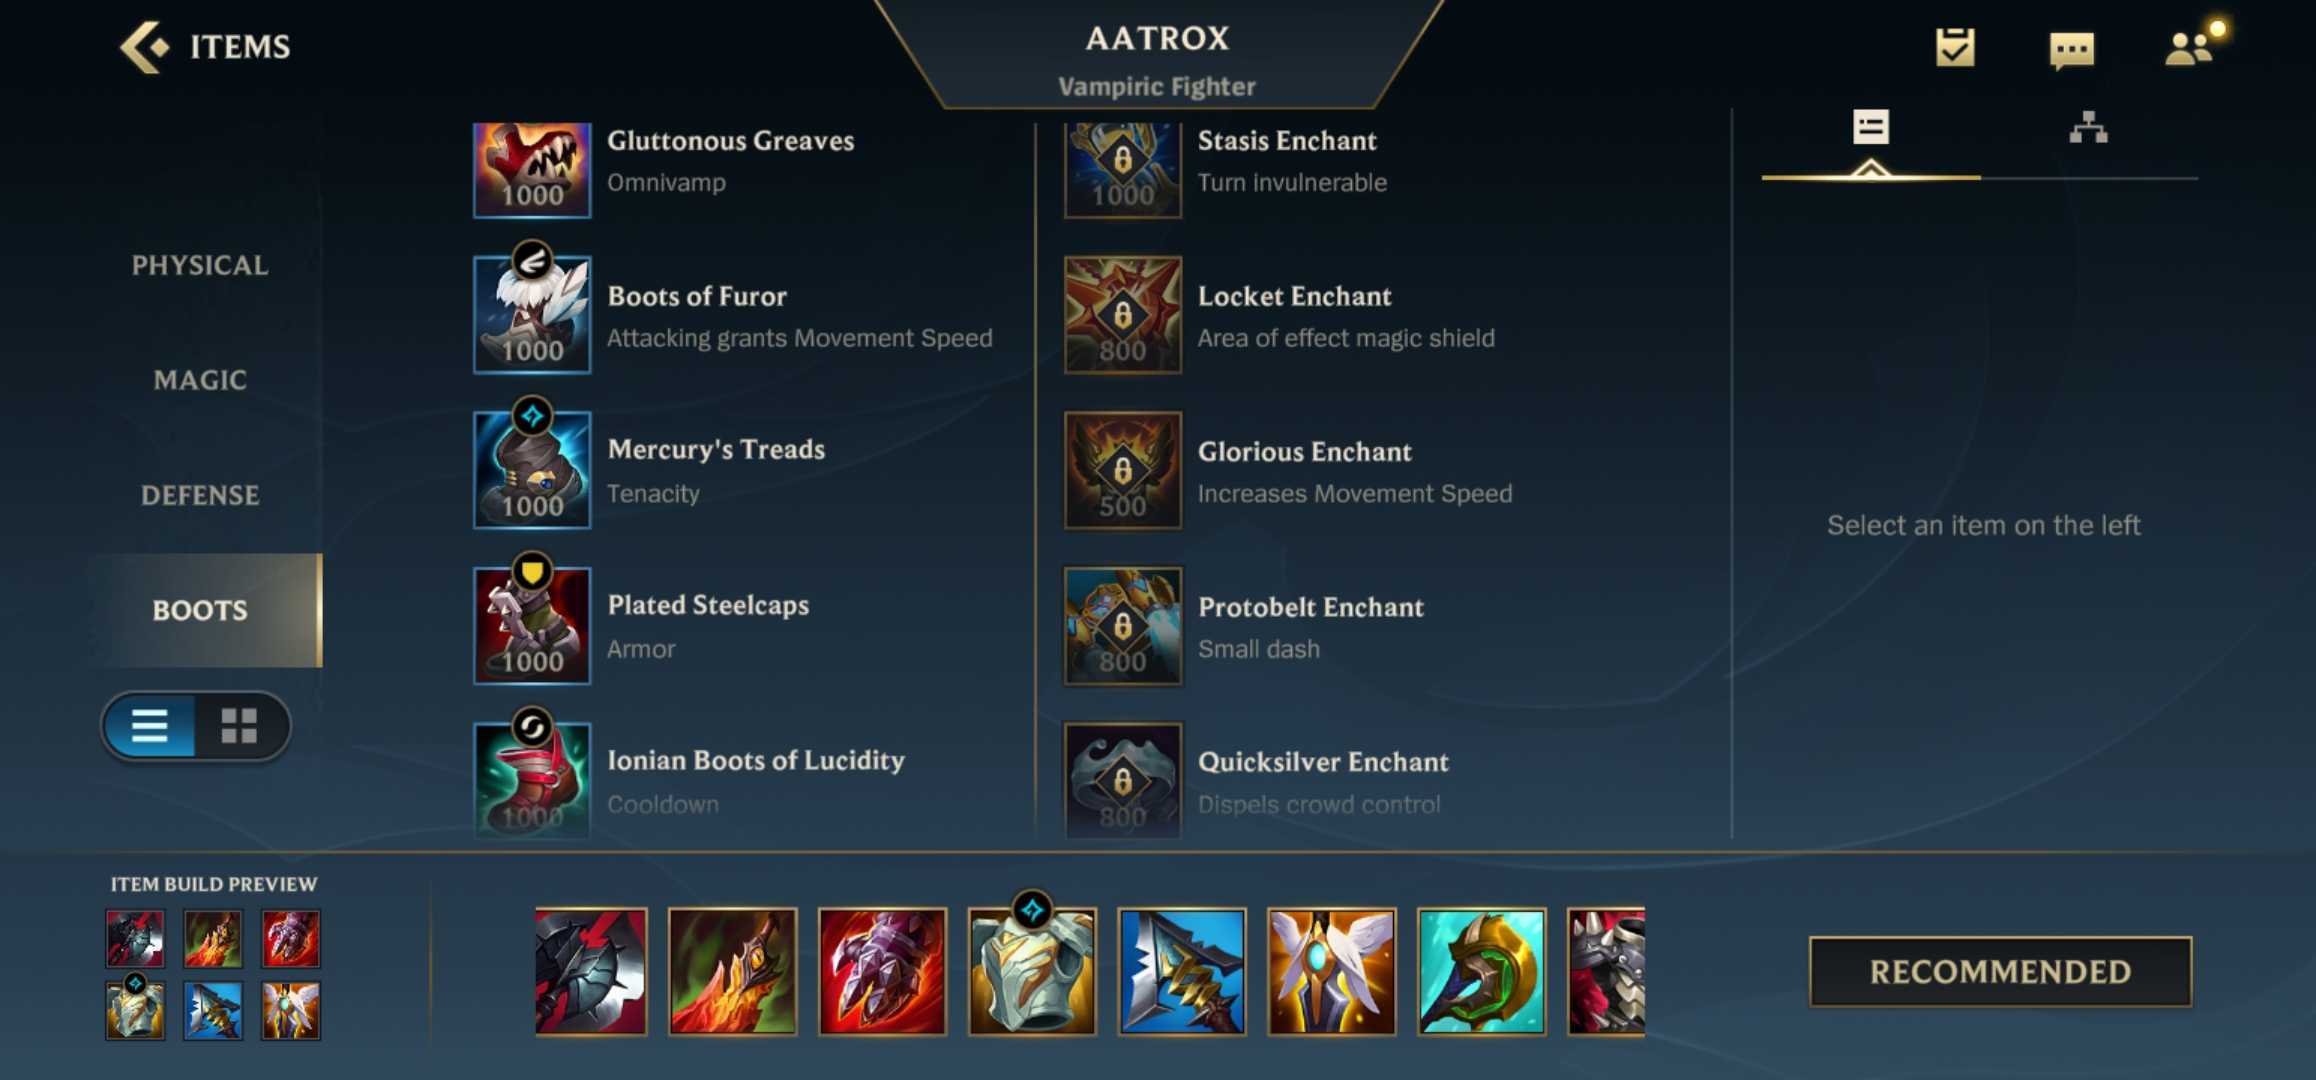 Aatrox Recommended Item Build